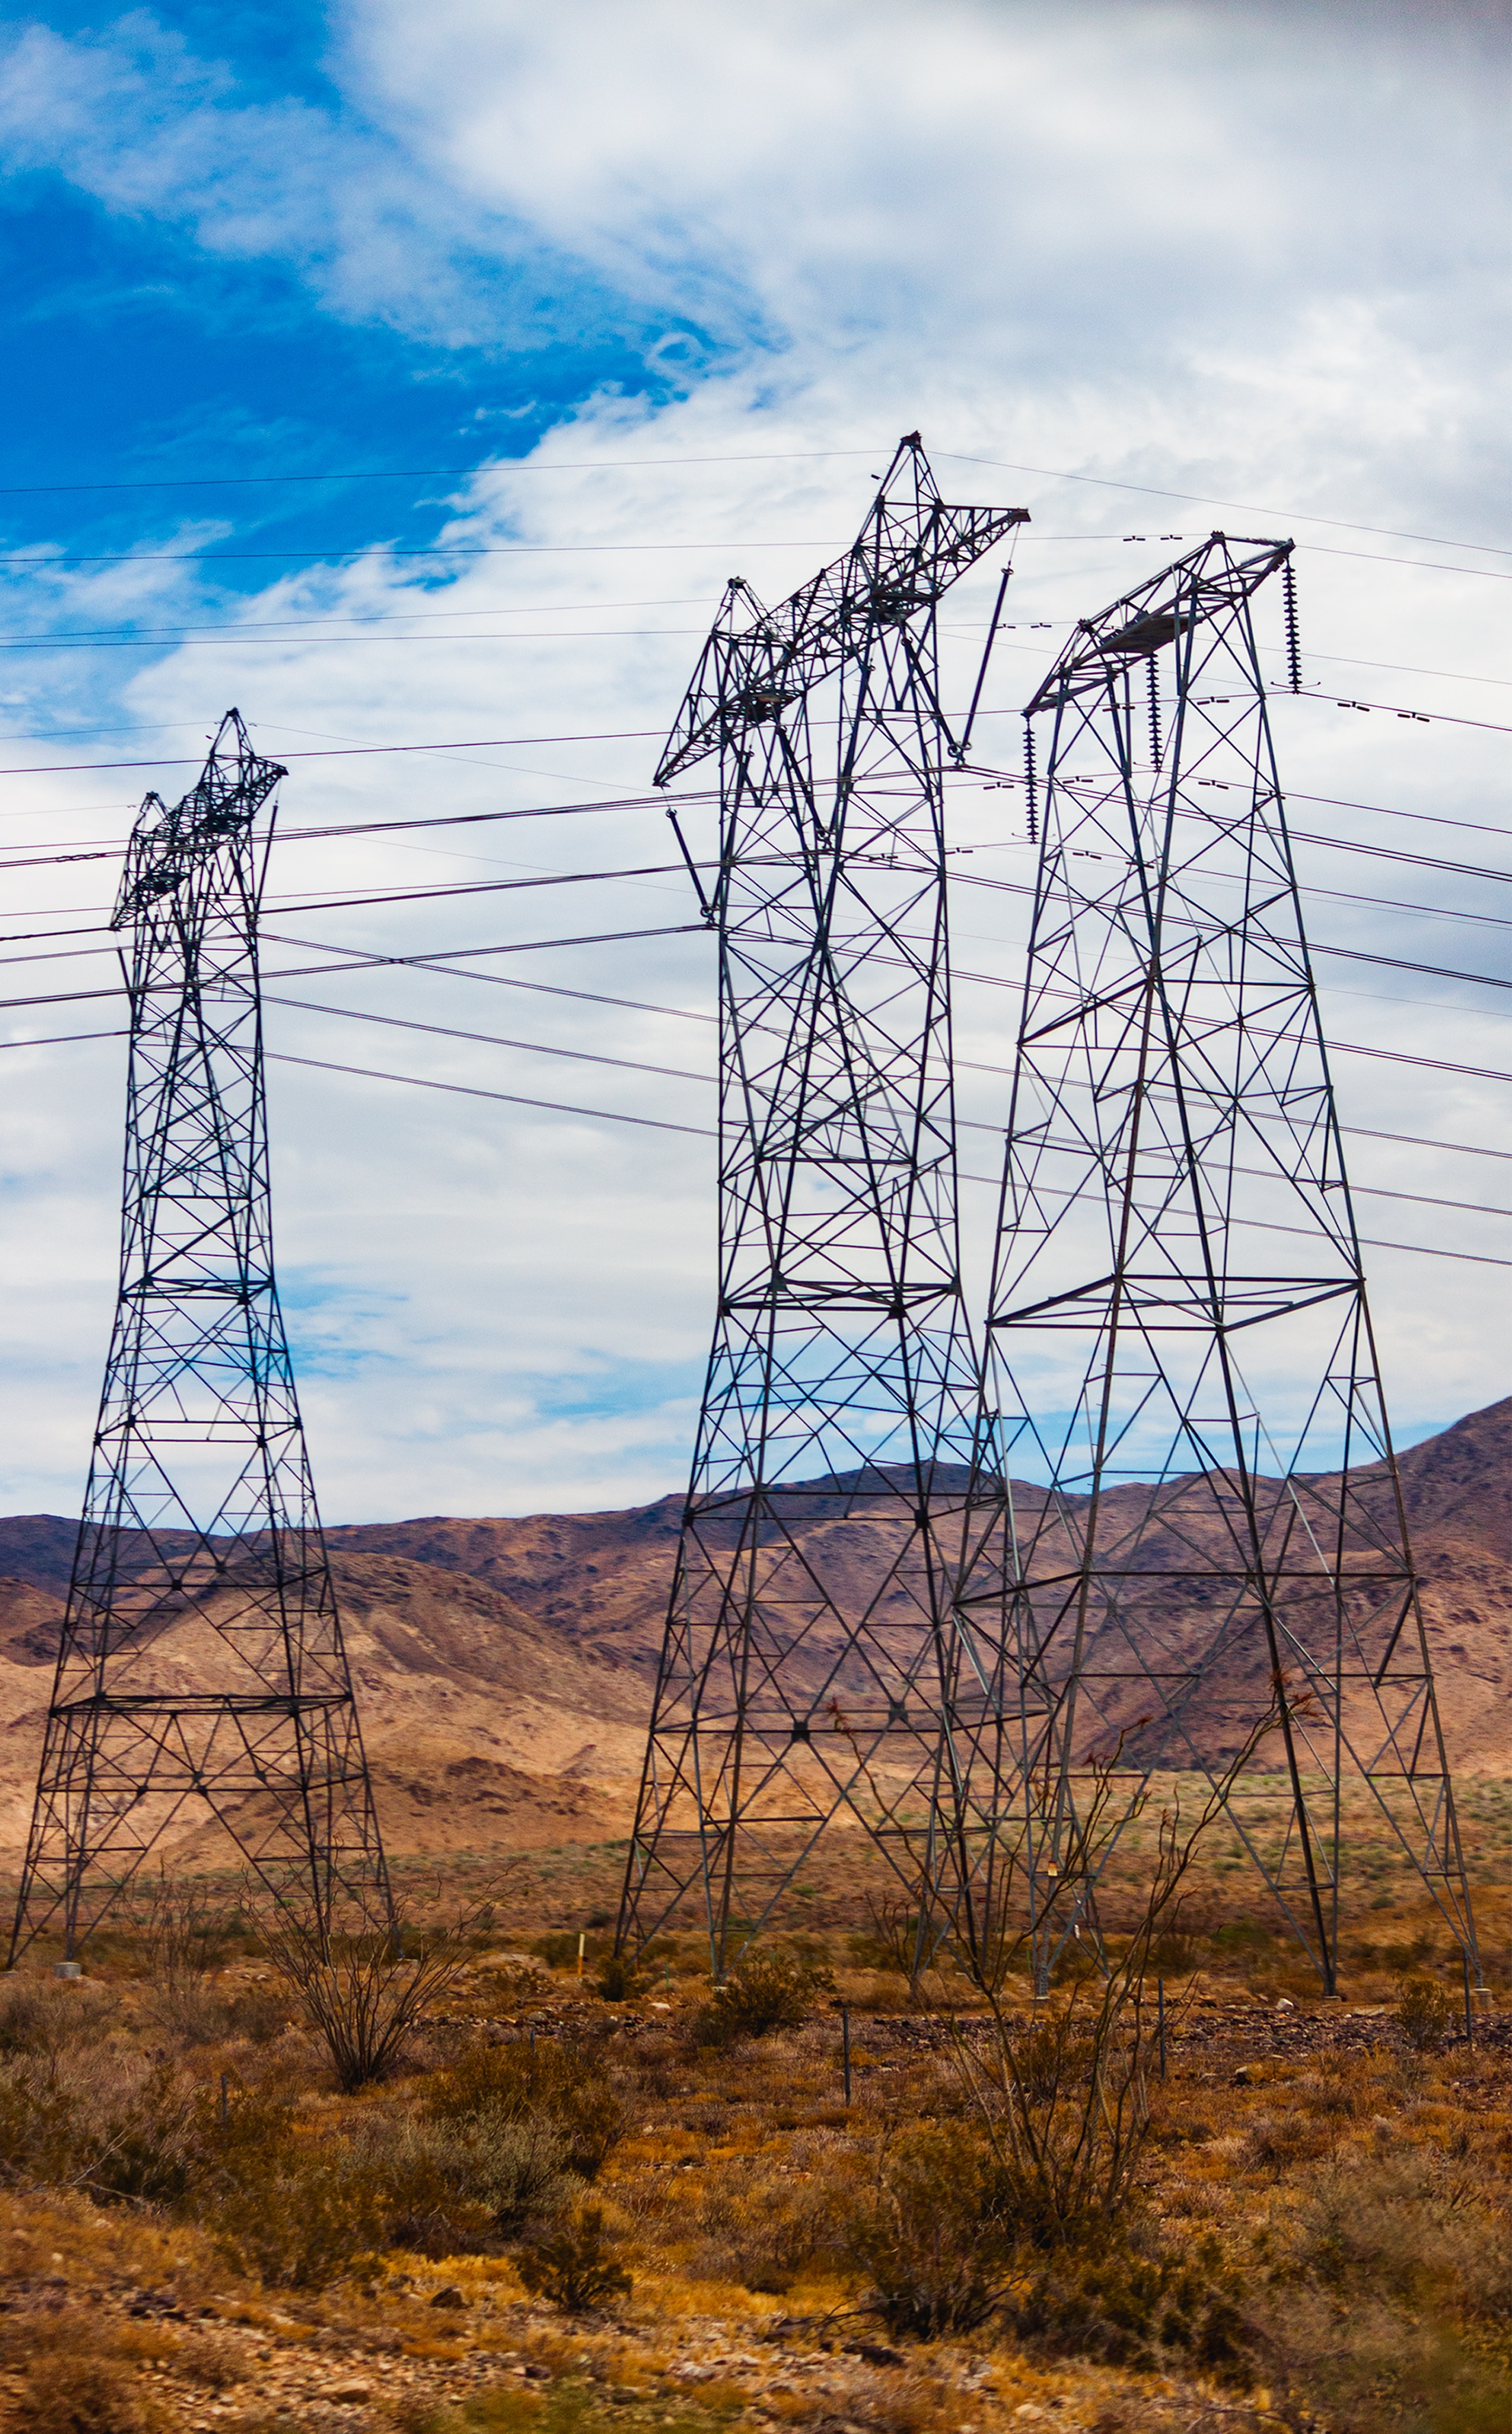 The Challenges of Setting up an International Power Grid